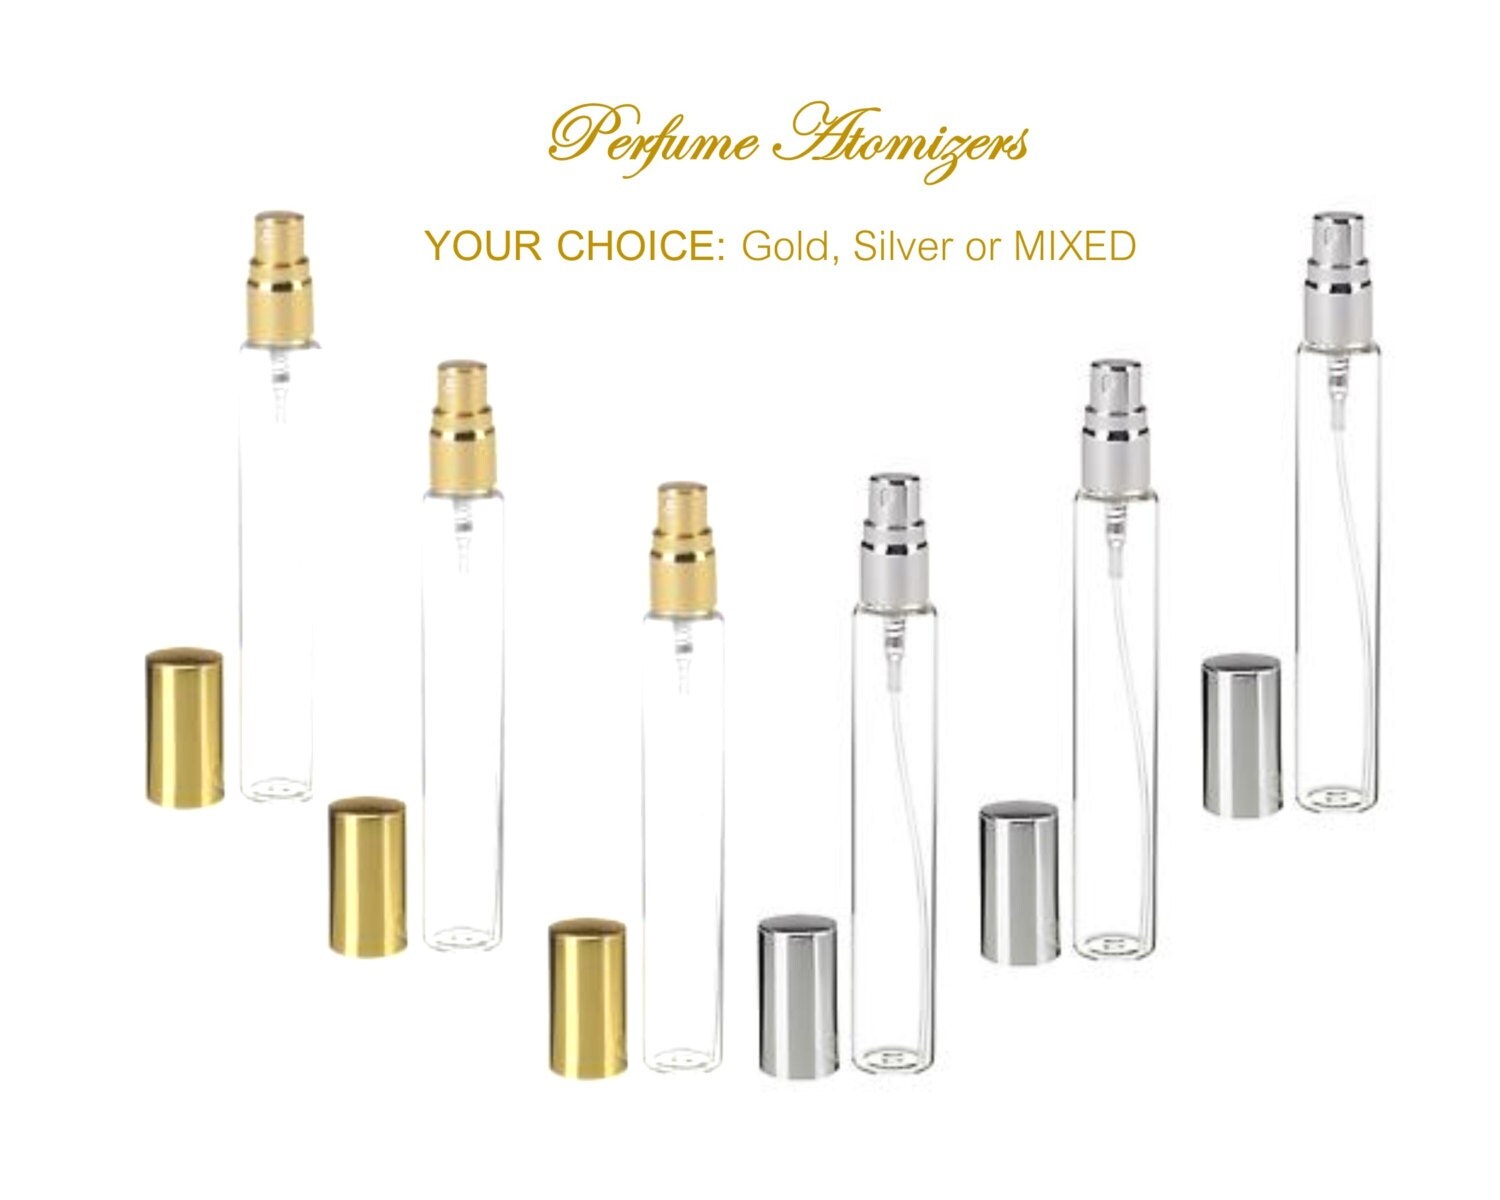 6 Clear 15ml Glass Perfume Oil Mist Atomizers GOLD or SILVER Metallic ...